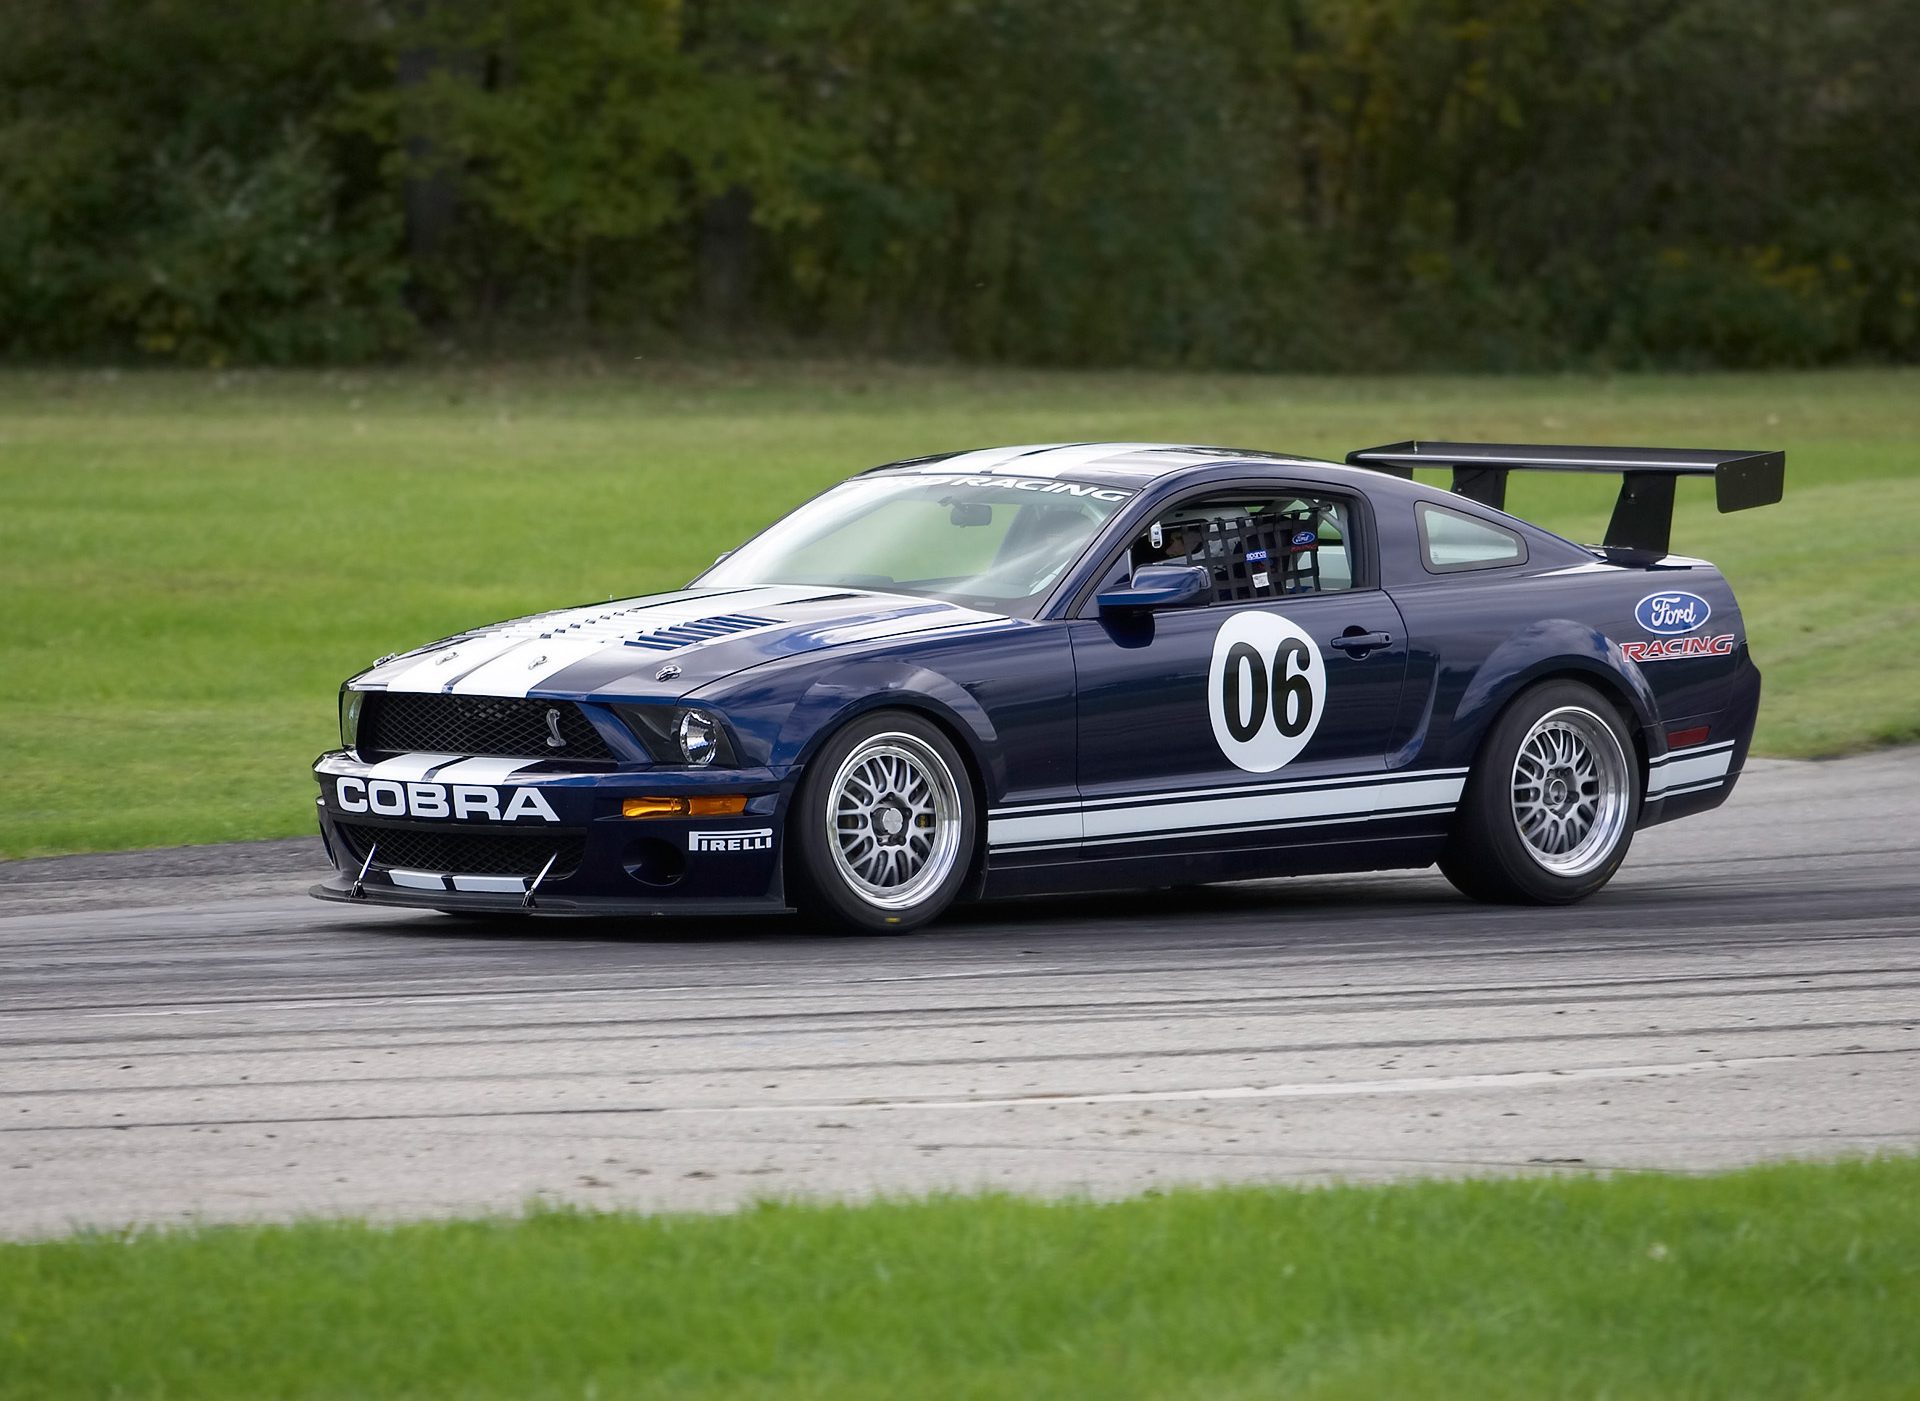 2007 Ford Mustang FR500 GT Concept